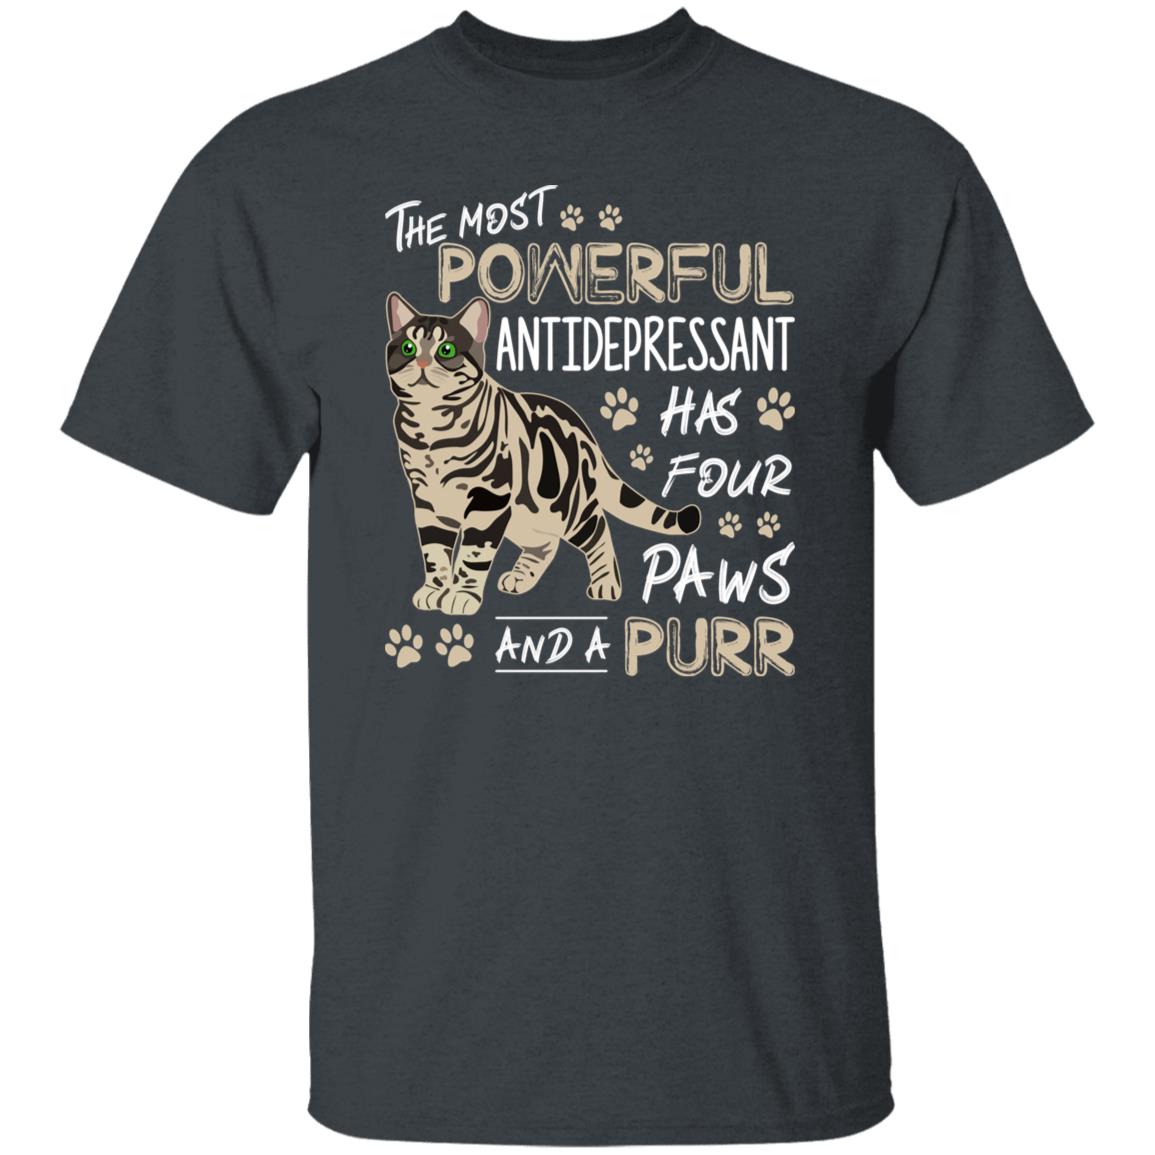 The most powerful antidepressant has four paws Unisex shirt Black Dark Heather-Family-Gift-Planet